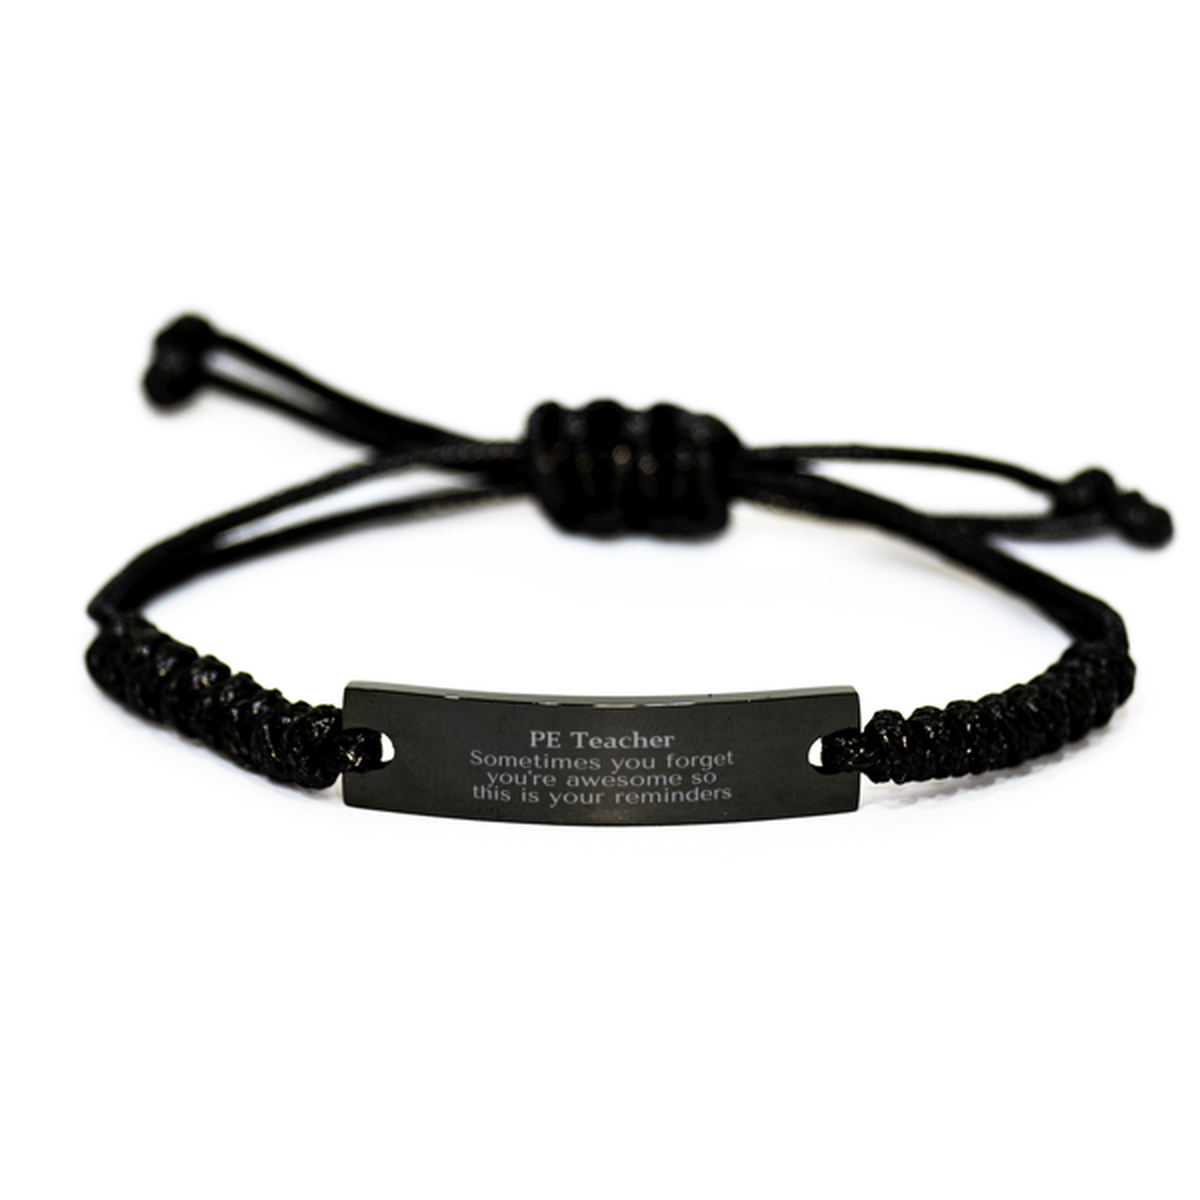 Sentimental PE Teacher Black Rope Bracelet, PE Teacher Sometimes you forget you're awesome so this is your reminders, Graduation Christmas Birthday Gifts for PE Teacher, Men, Women, Coworkers